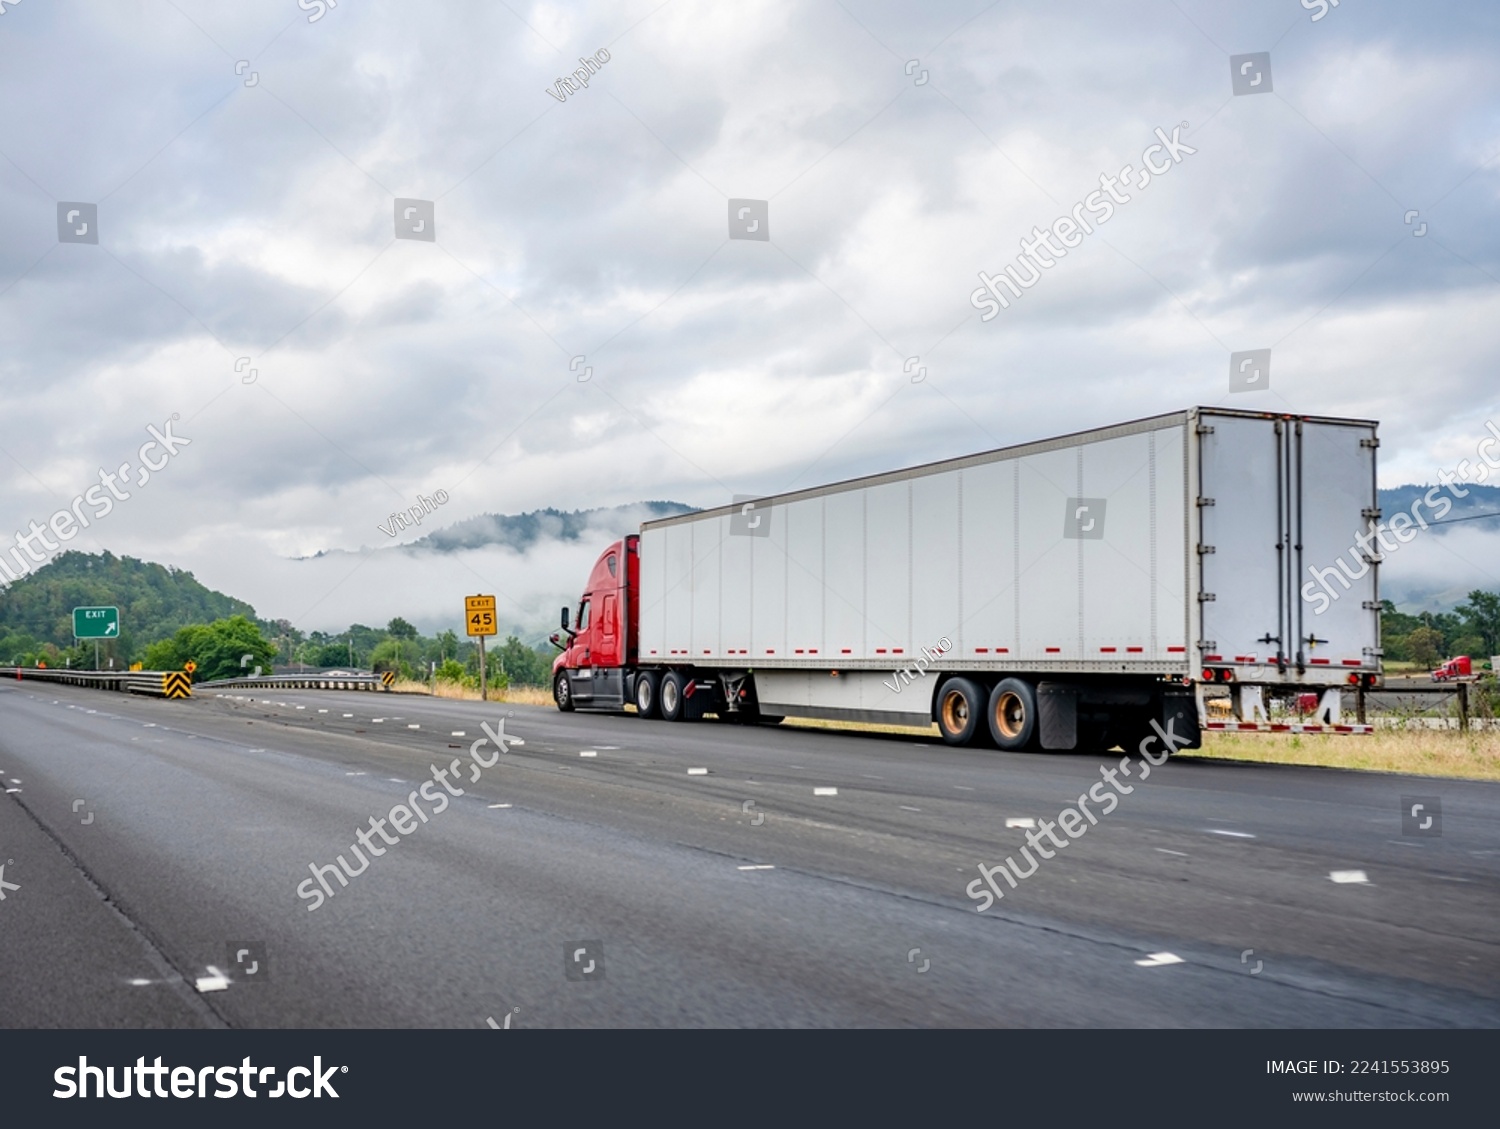 Bright red industrial long haul big rig semi truck with dry van semi trailer stands on the side of the road having made a planned stop for a break according to schedule of movement along the log book #2241553895